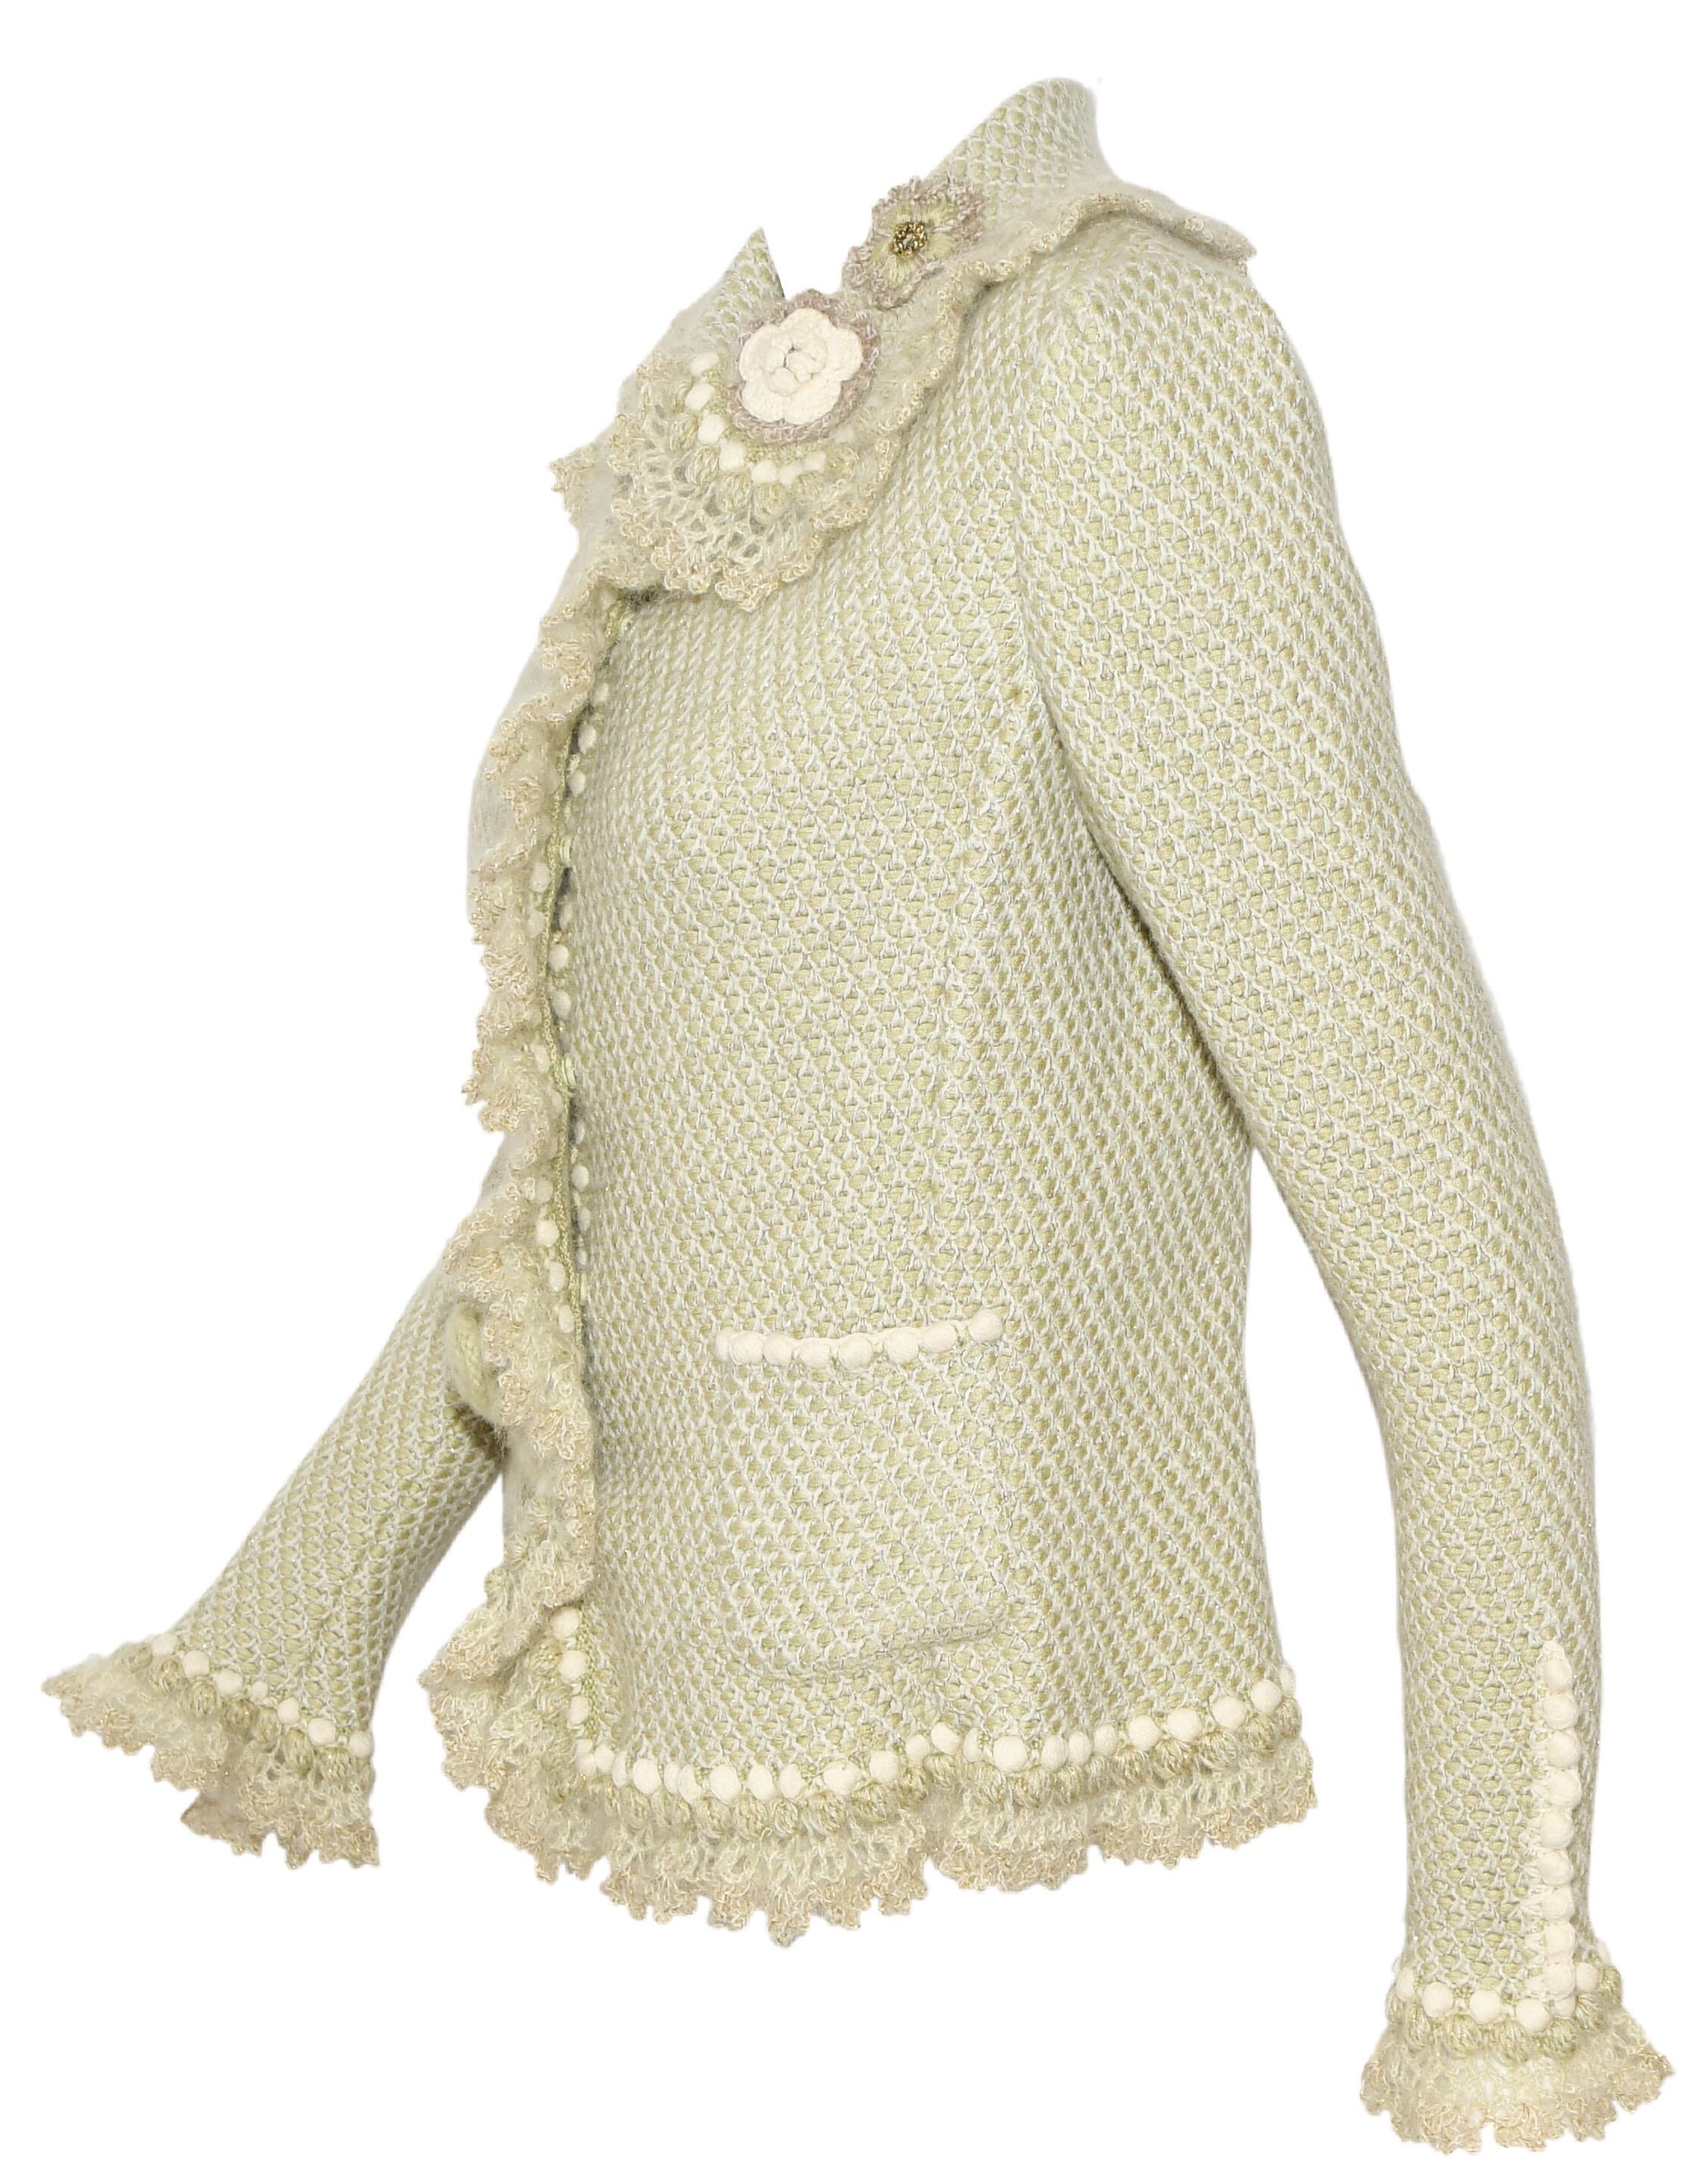 Oscar de la Renta pale green cashmere and wool sweater jacket includes crochet flowers on collar and one pocket.  Sweater jackets features round collar, two front patch pockets and ruffles on the front opening, cuffs and hem.  Excellent Condition! 